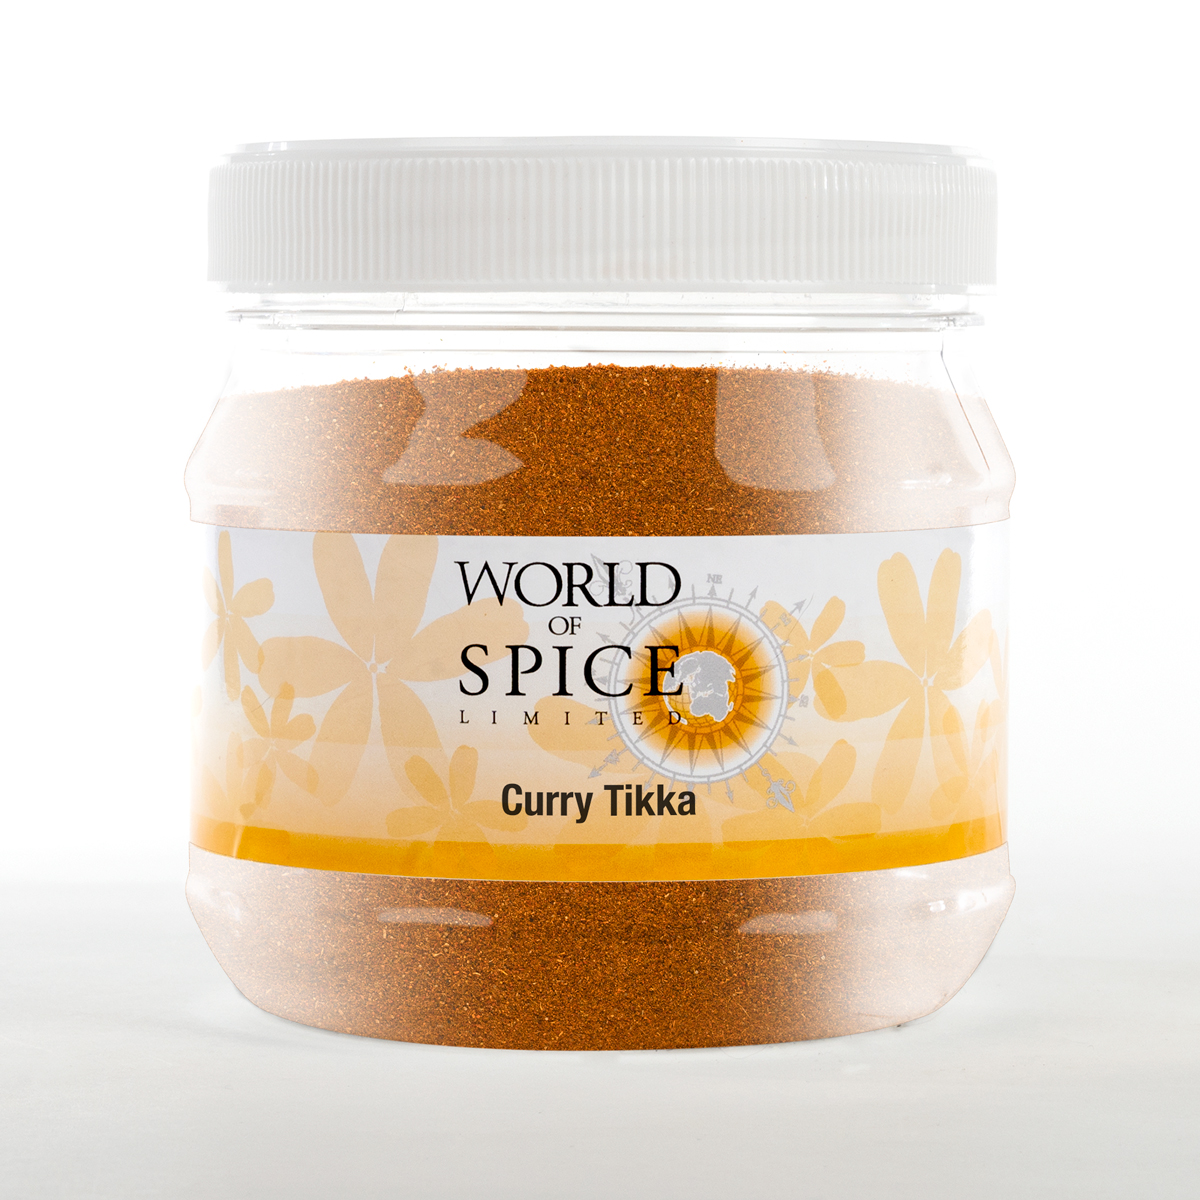 Spice Supplies UK - Tub of Curry Tikka